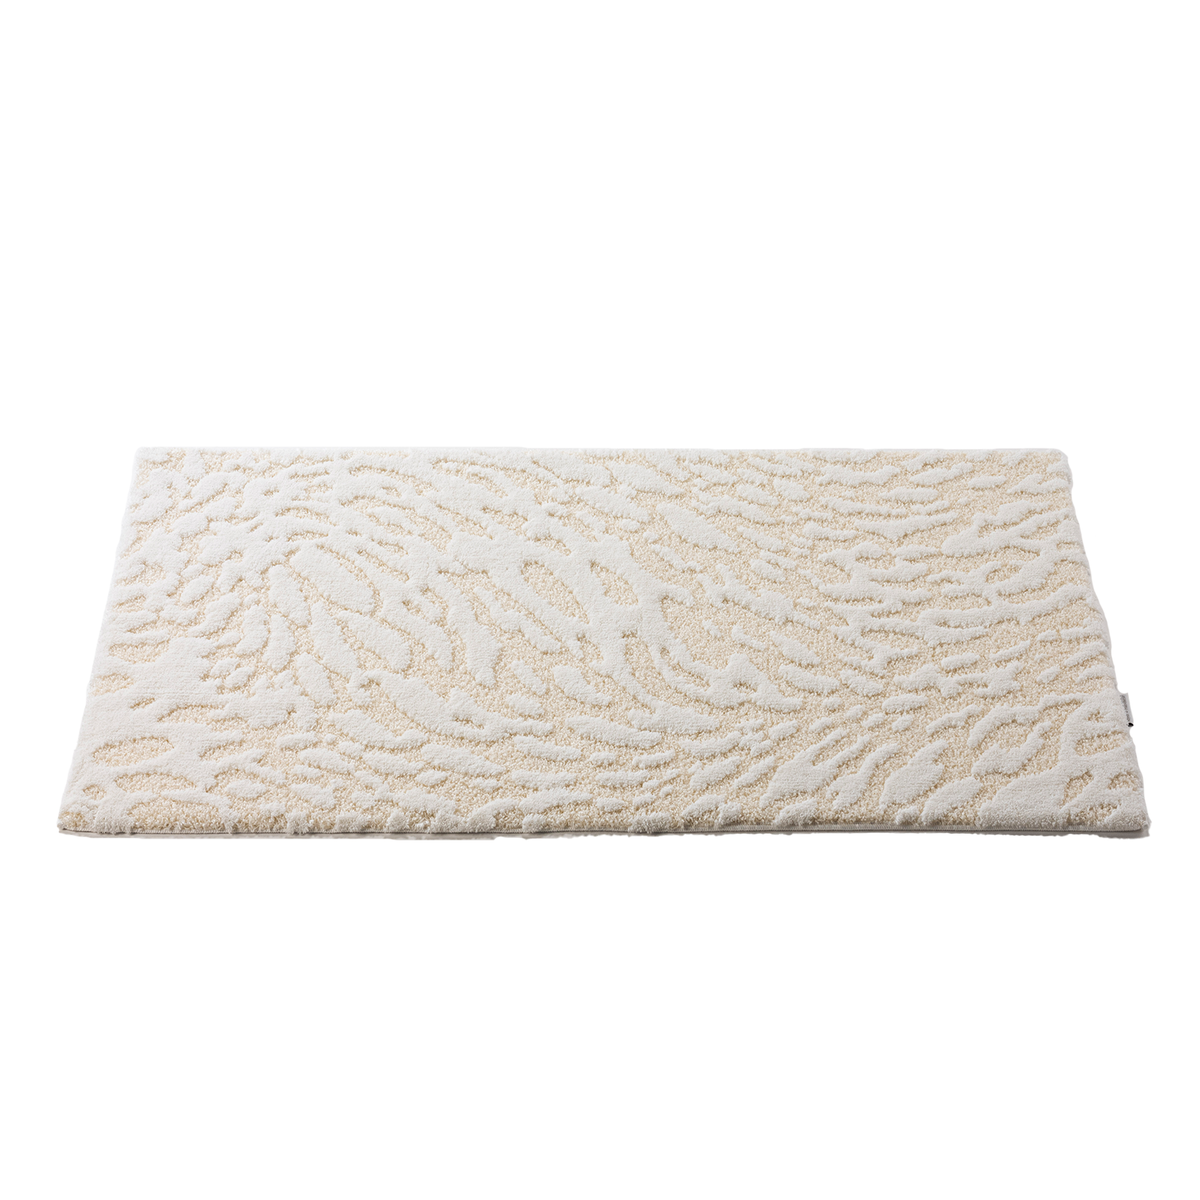 Straight Image of Abyss Habidecor Flow Bath Rugs in Color Ivory (103)